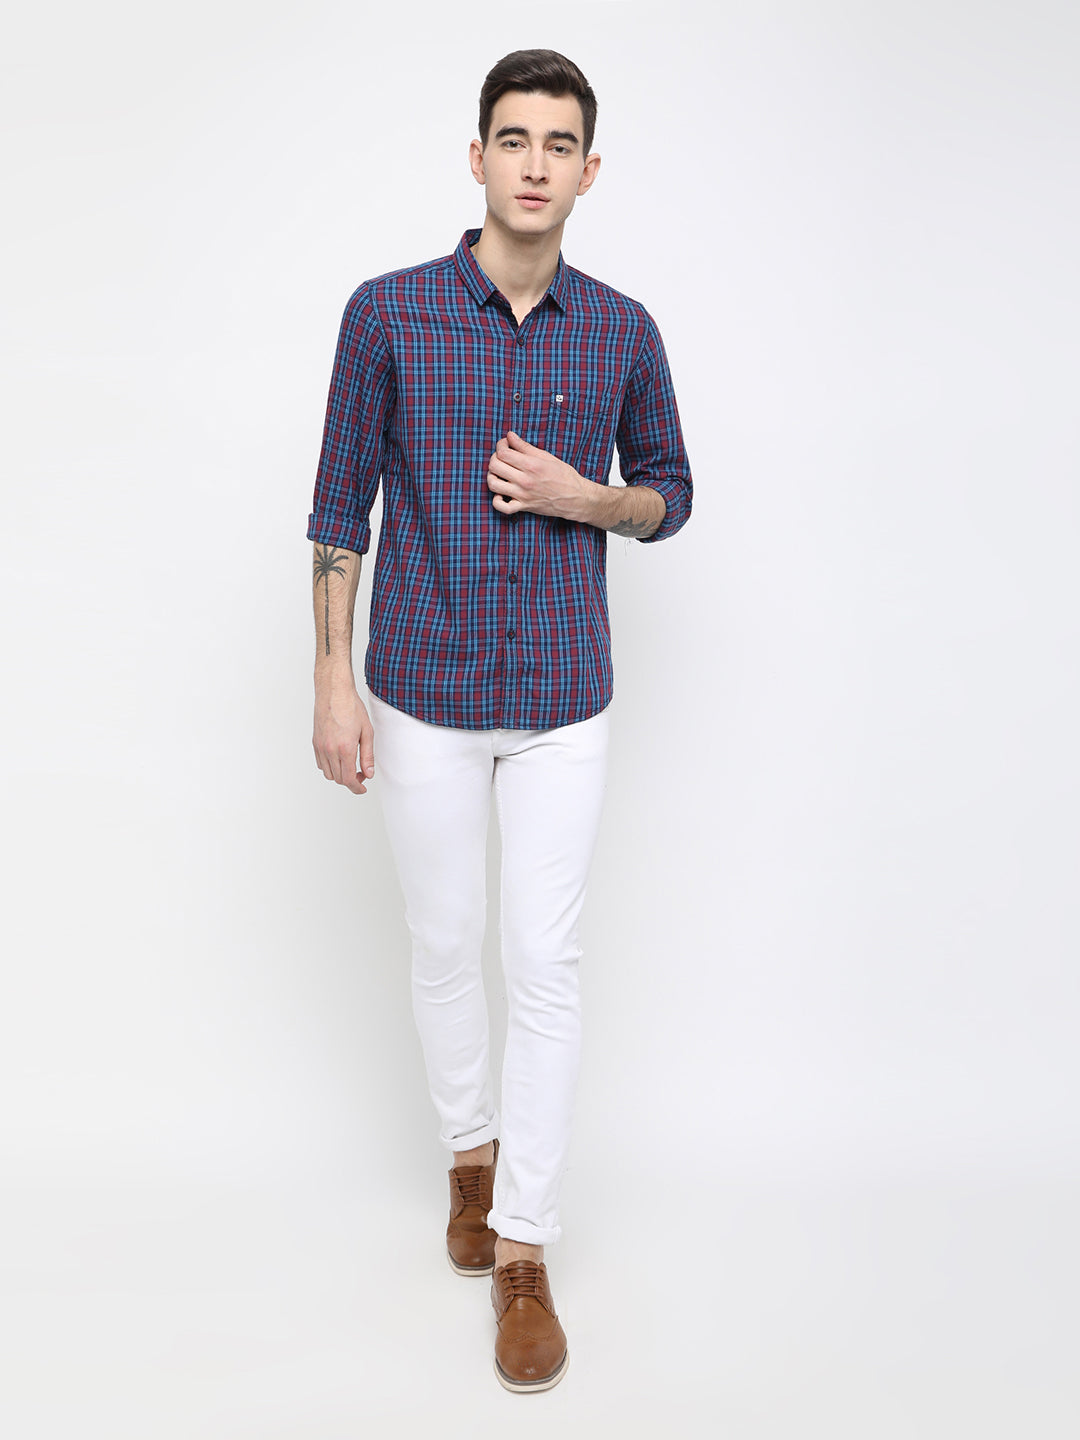 Pink and blue checkered casual shirt - urban clothing co.